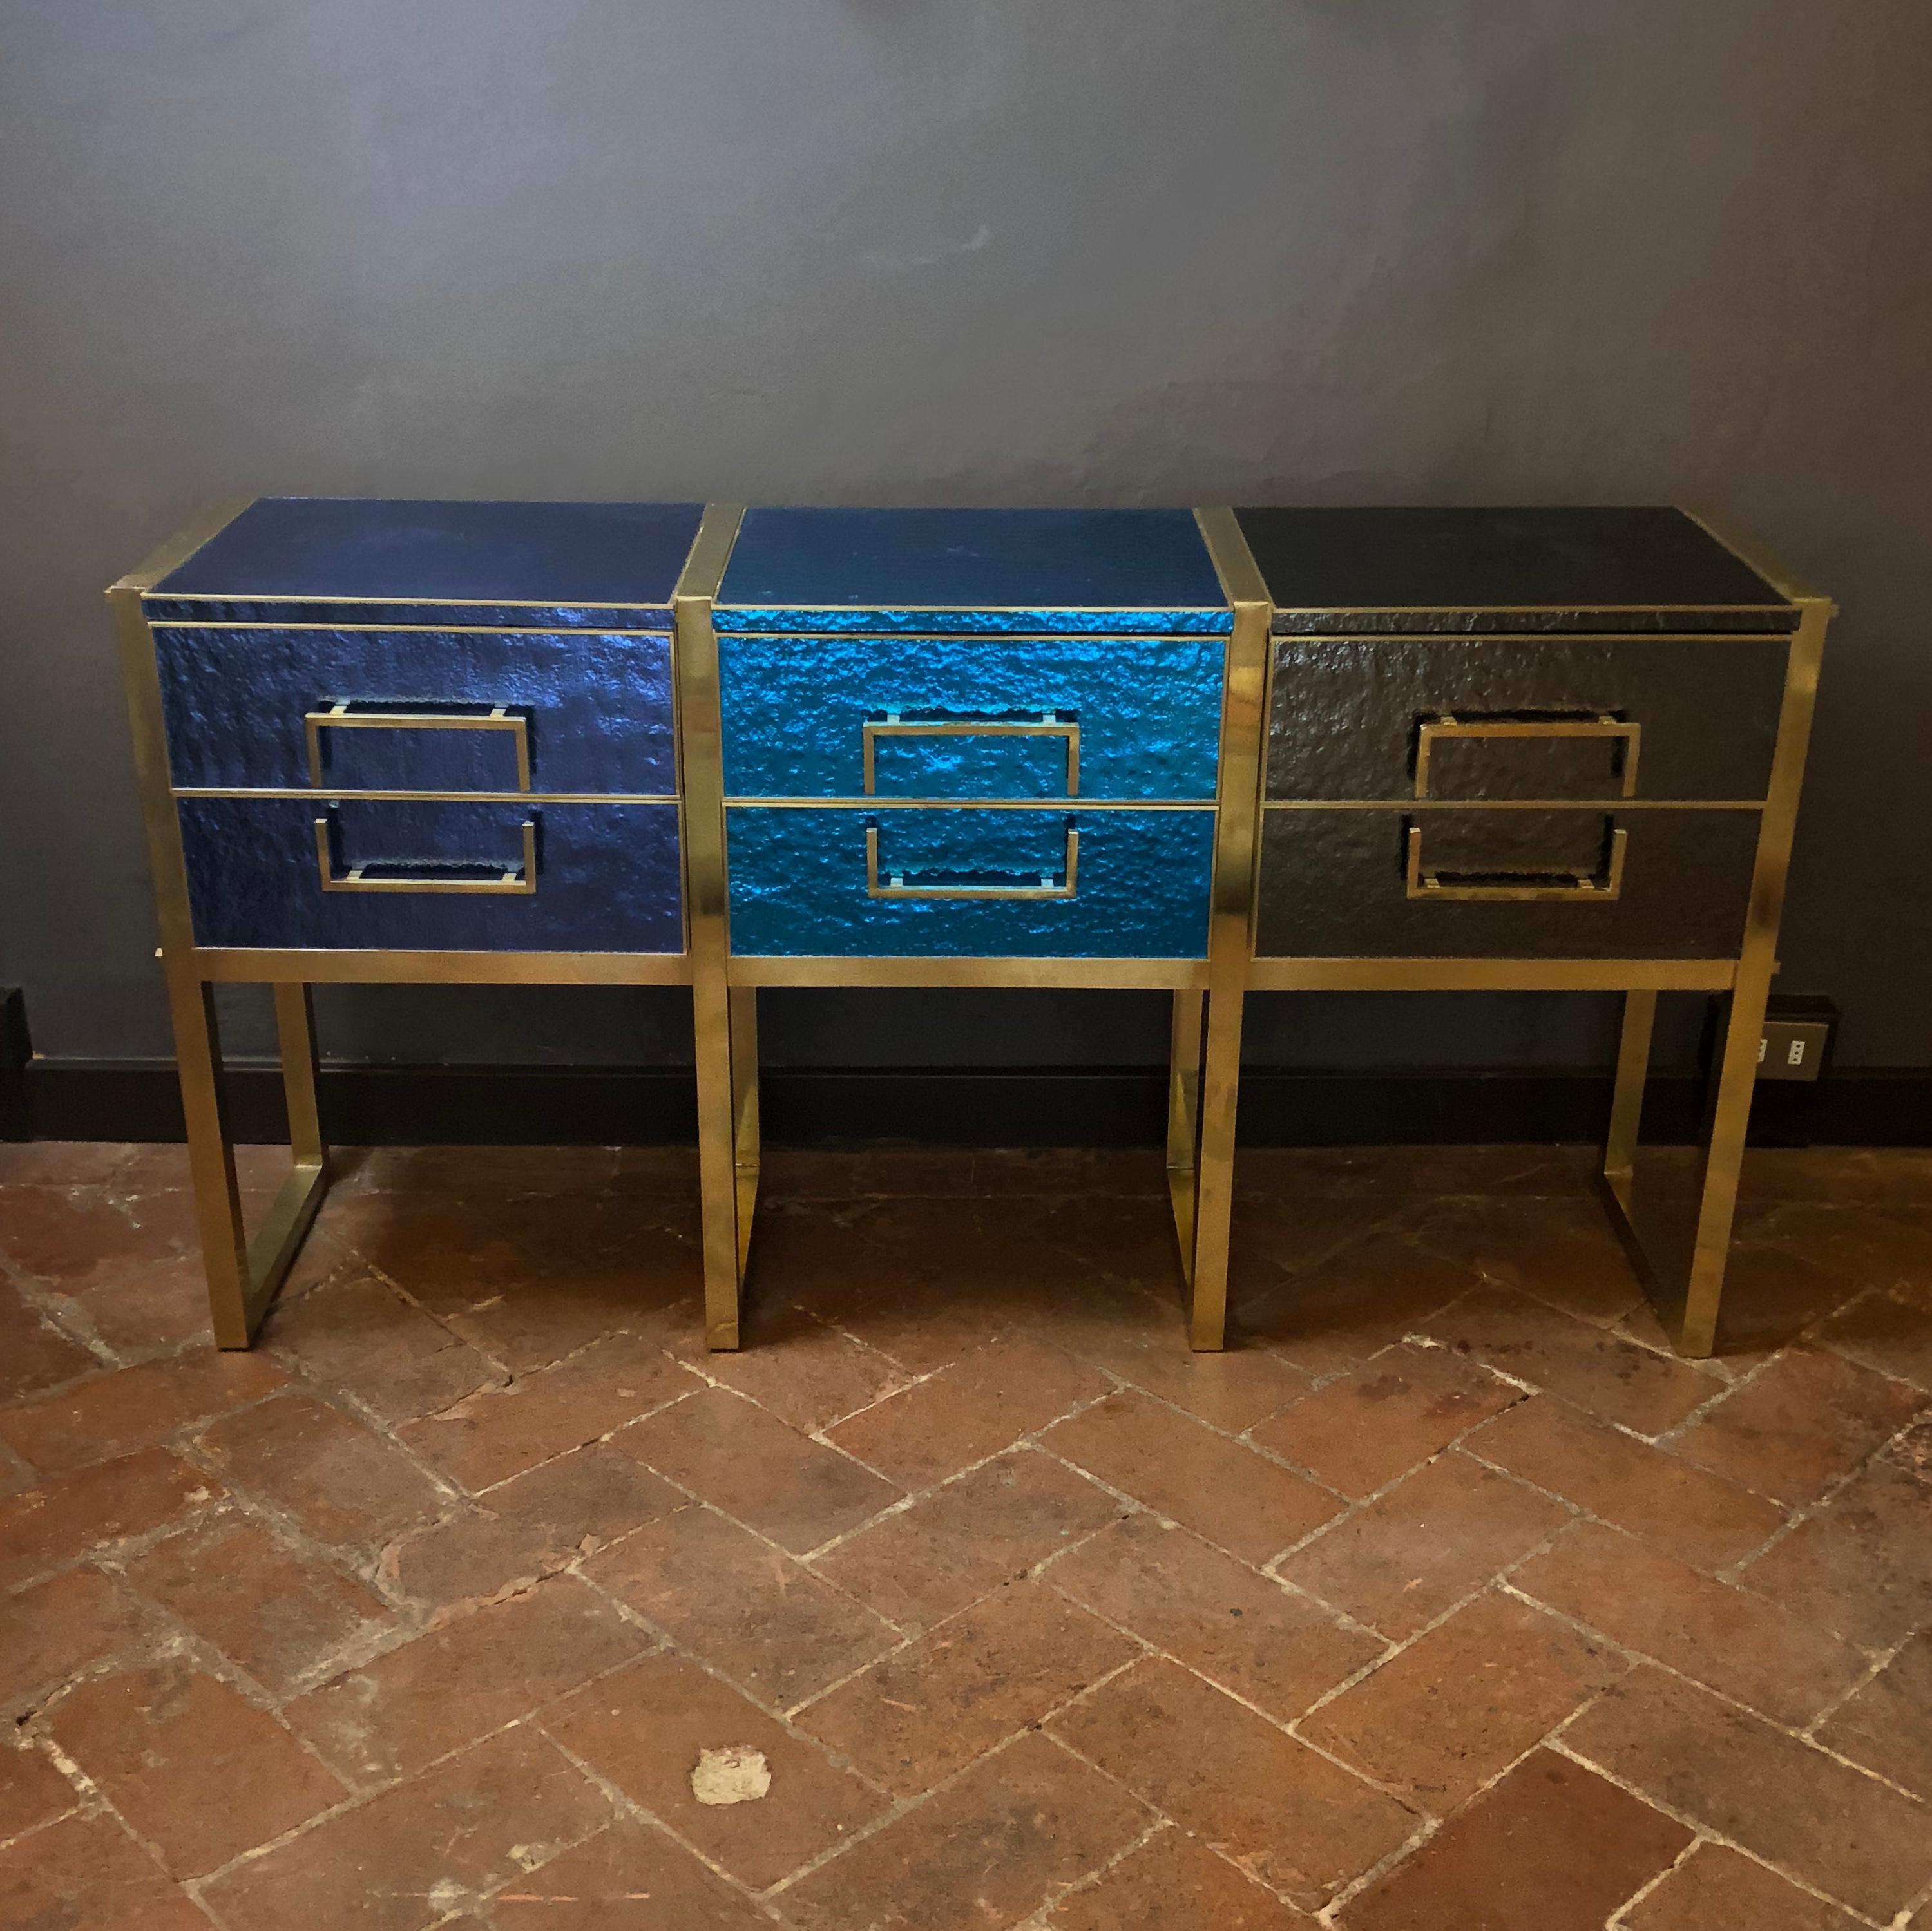 Three different iridescent colors: Blue, turquoise and grey.
6 drawers with grey velvet inside.